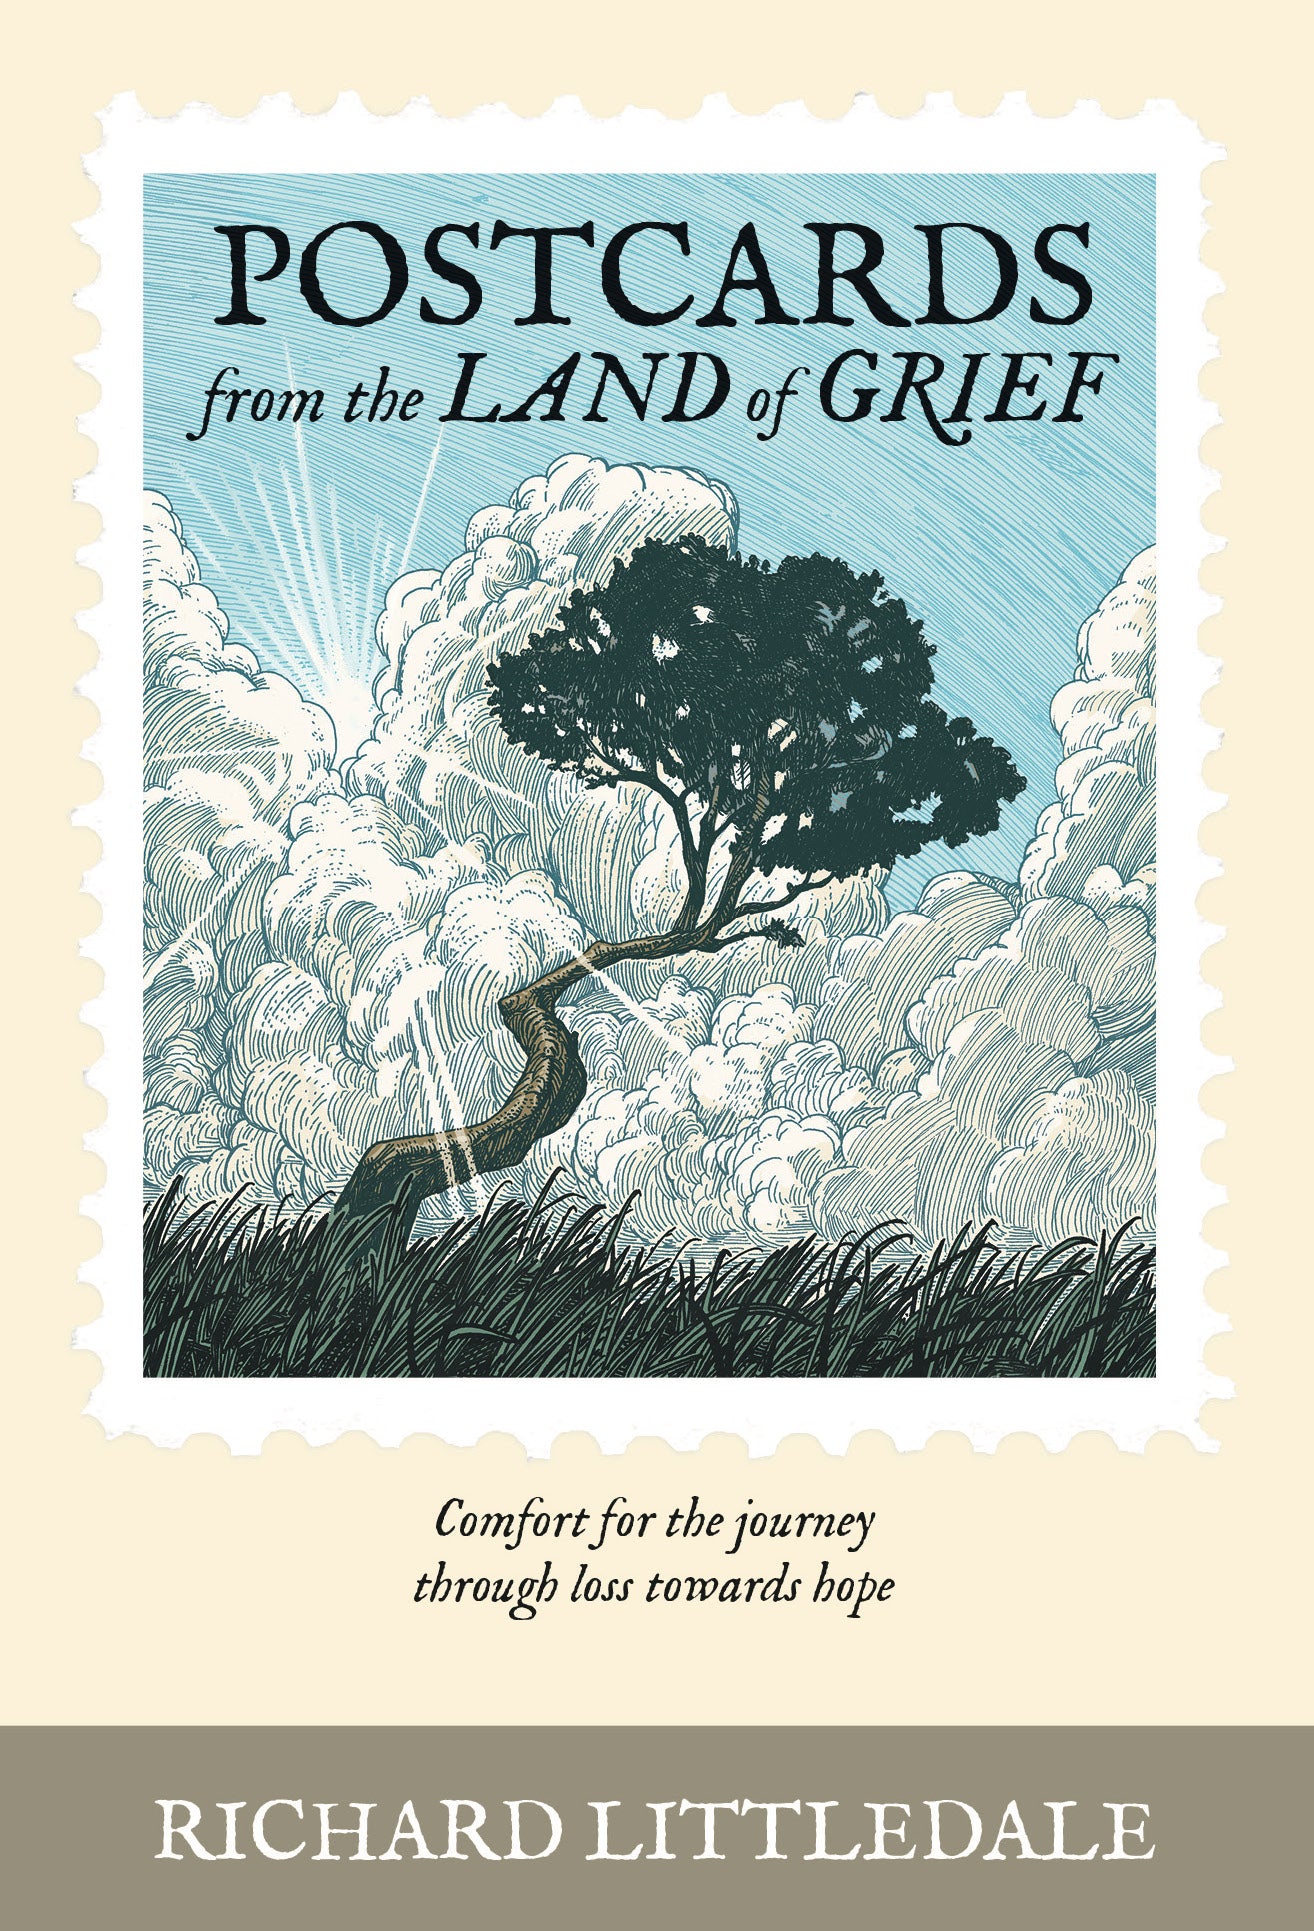 Image of Postcards from the Land of Grief other